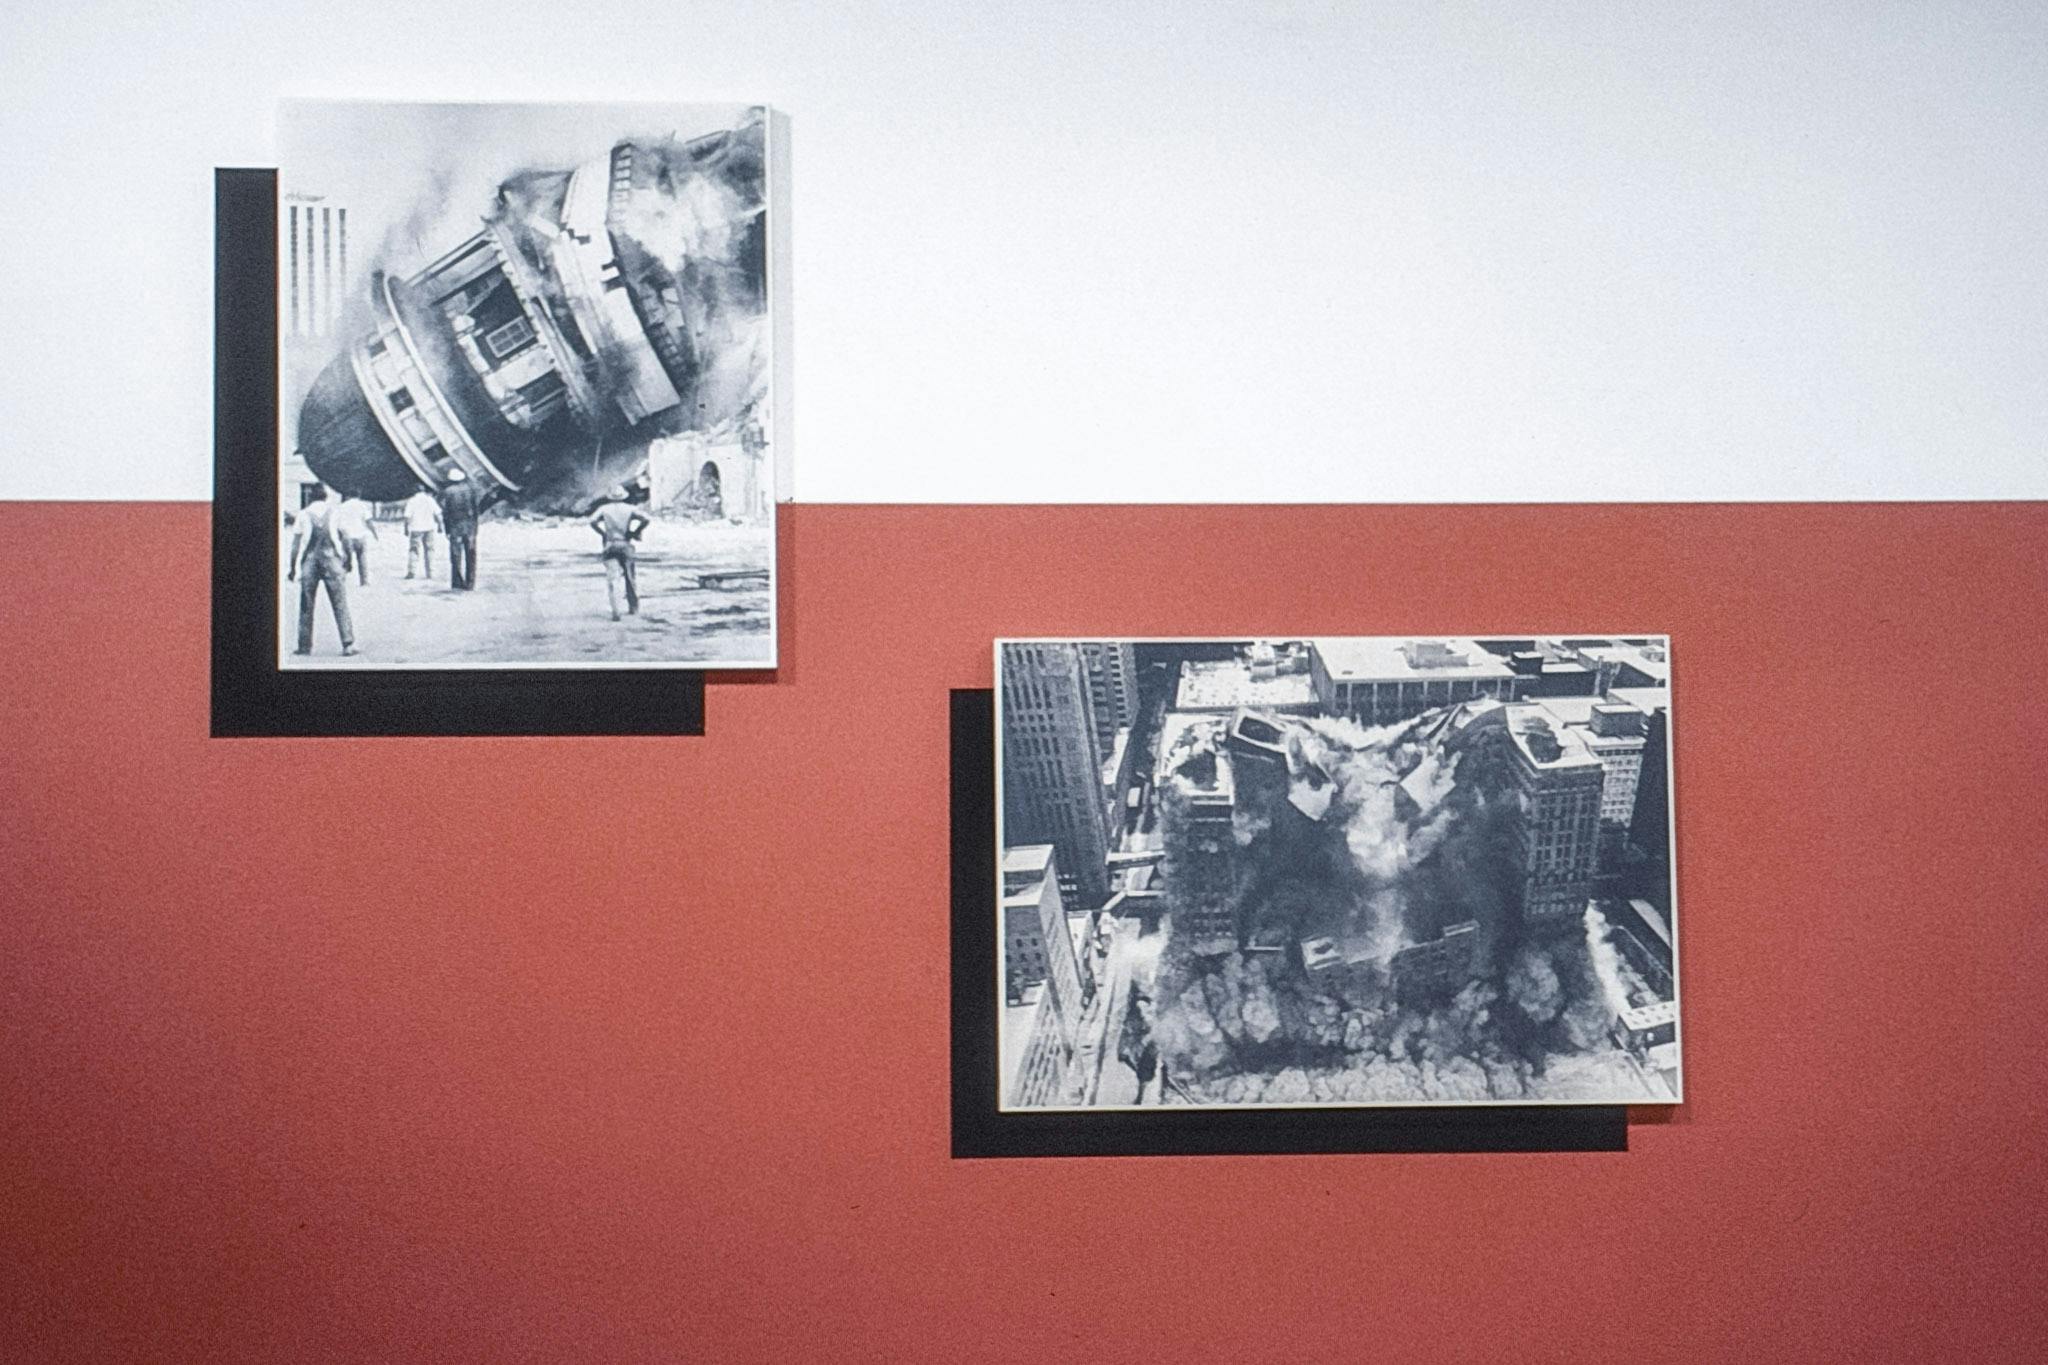 Two art works on a red and white wall. The works are black and white photos of buildings collapsing. In one, people stand, witnessing the disaster, and the other photo is from a bird's-eye view.